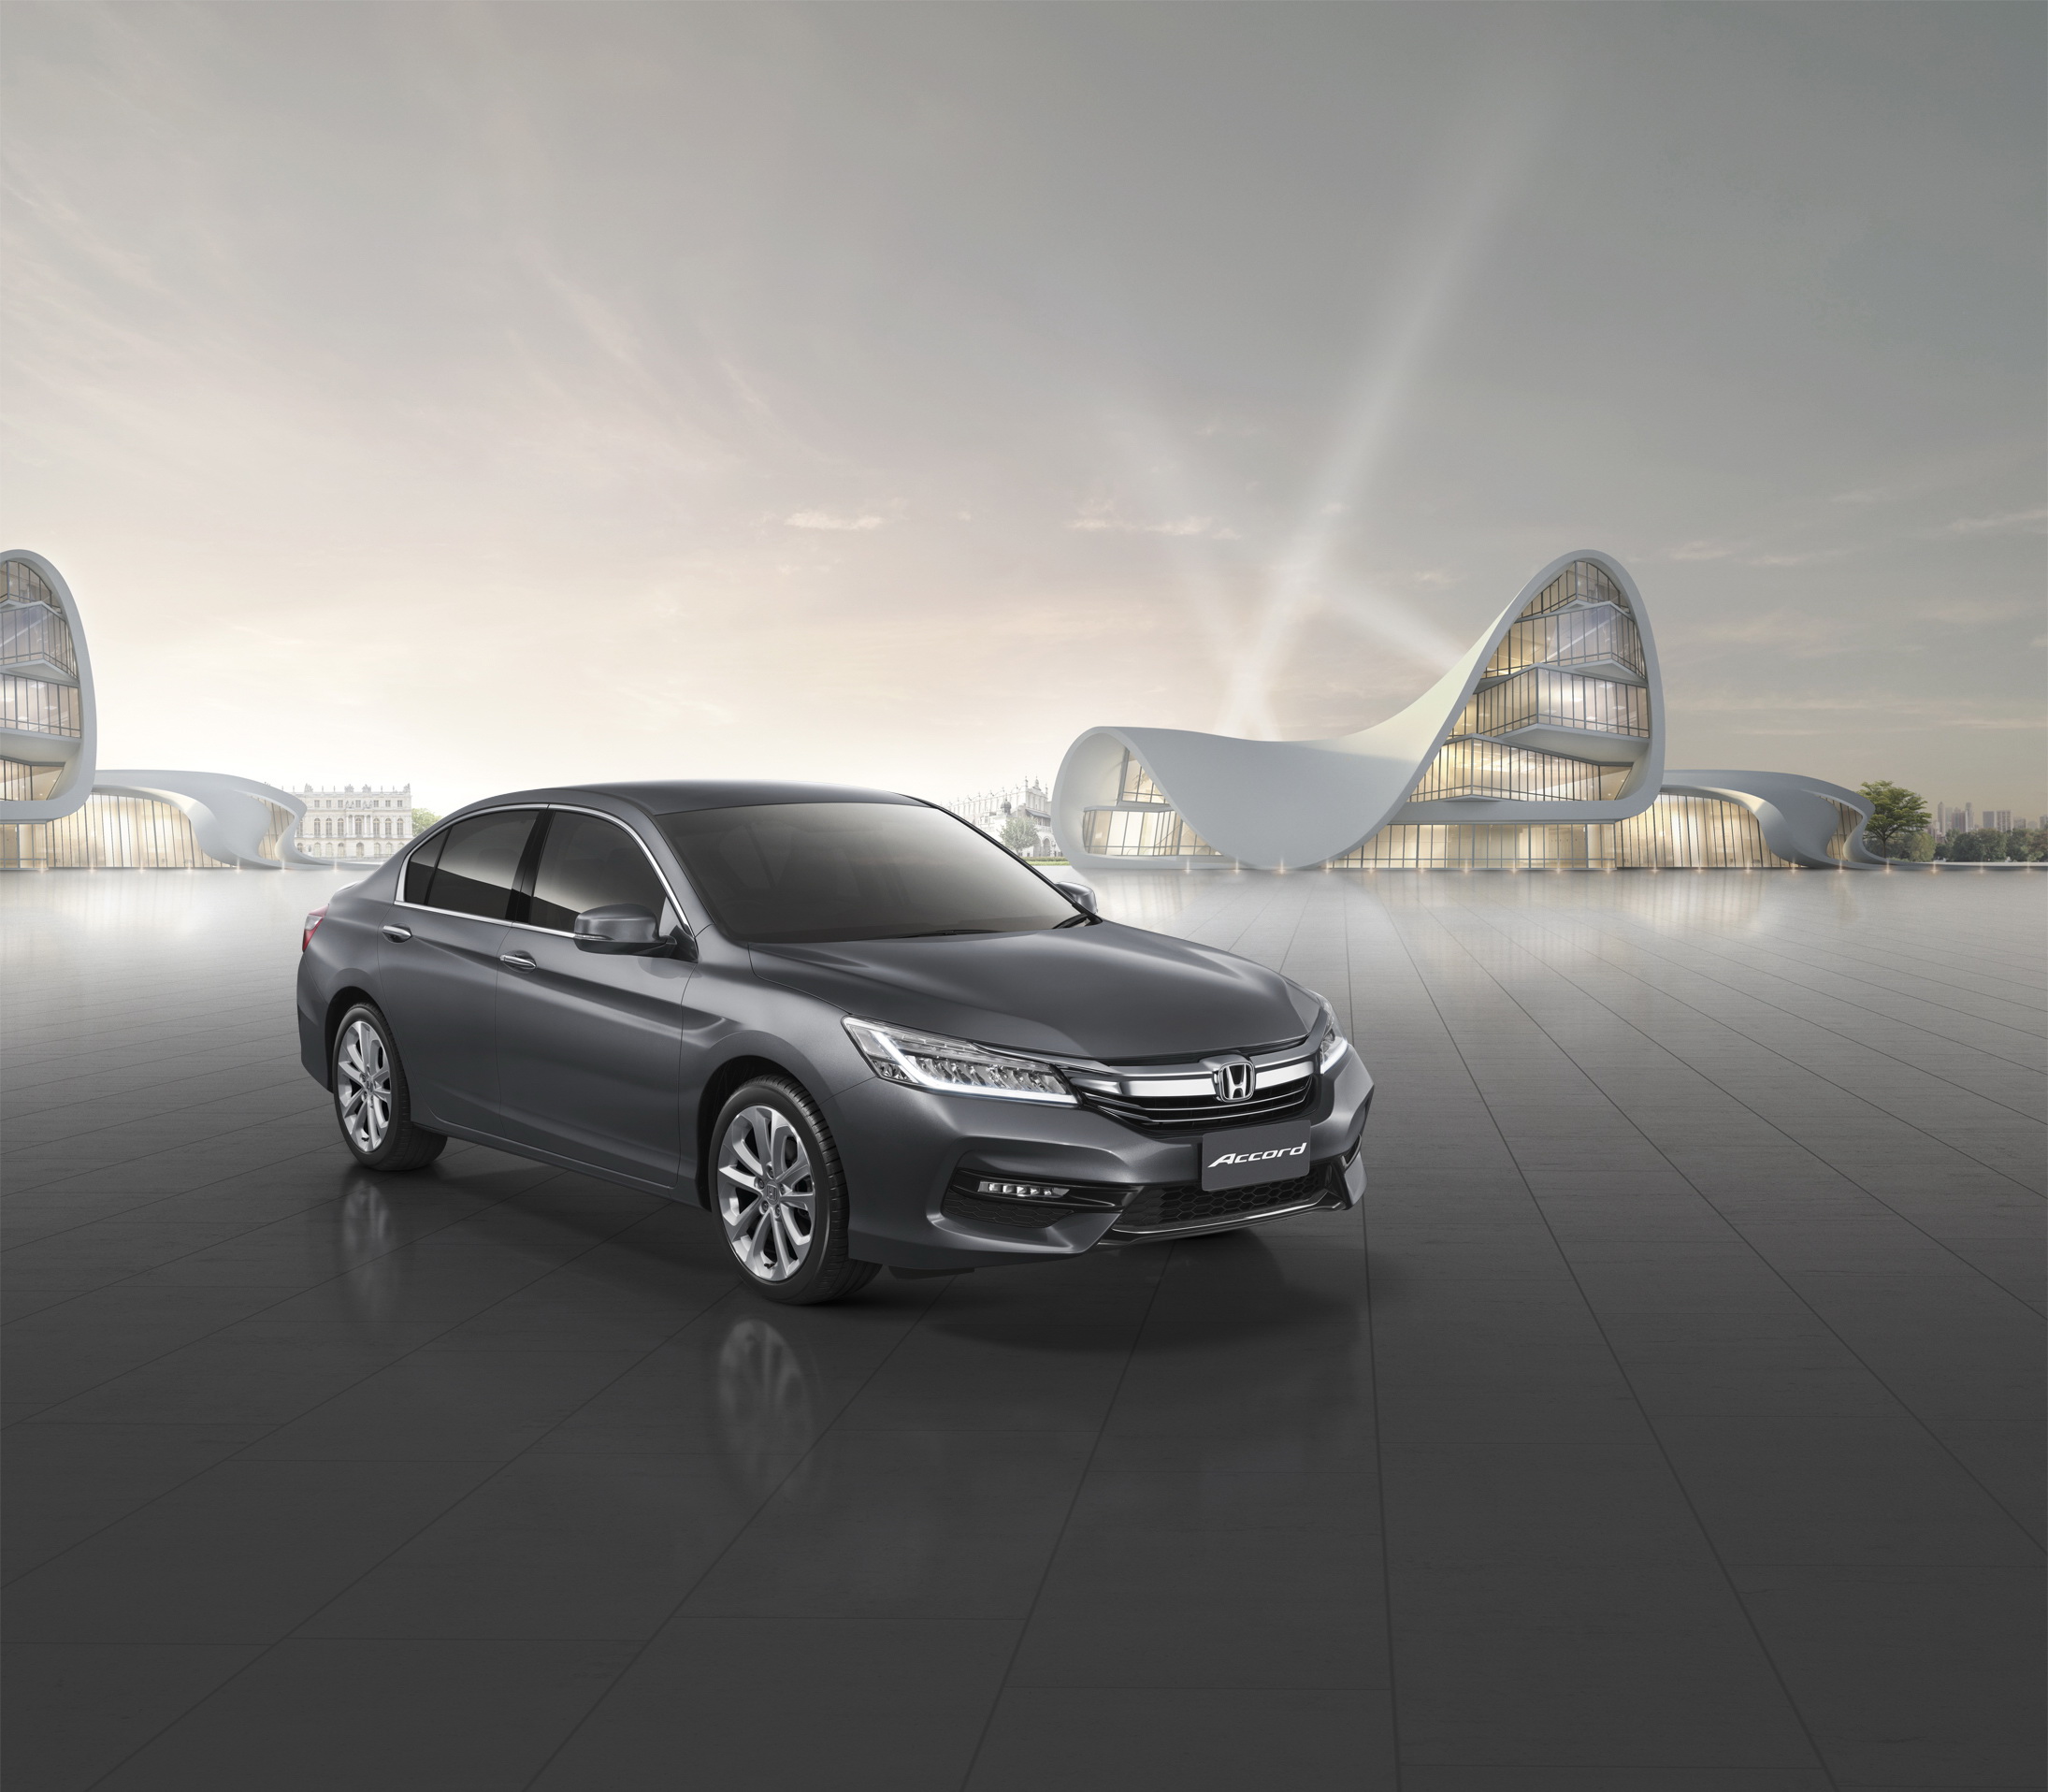 1 New Honda Accord with Background